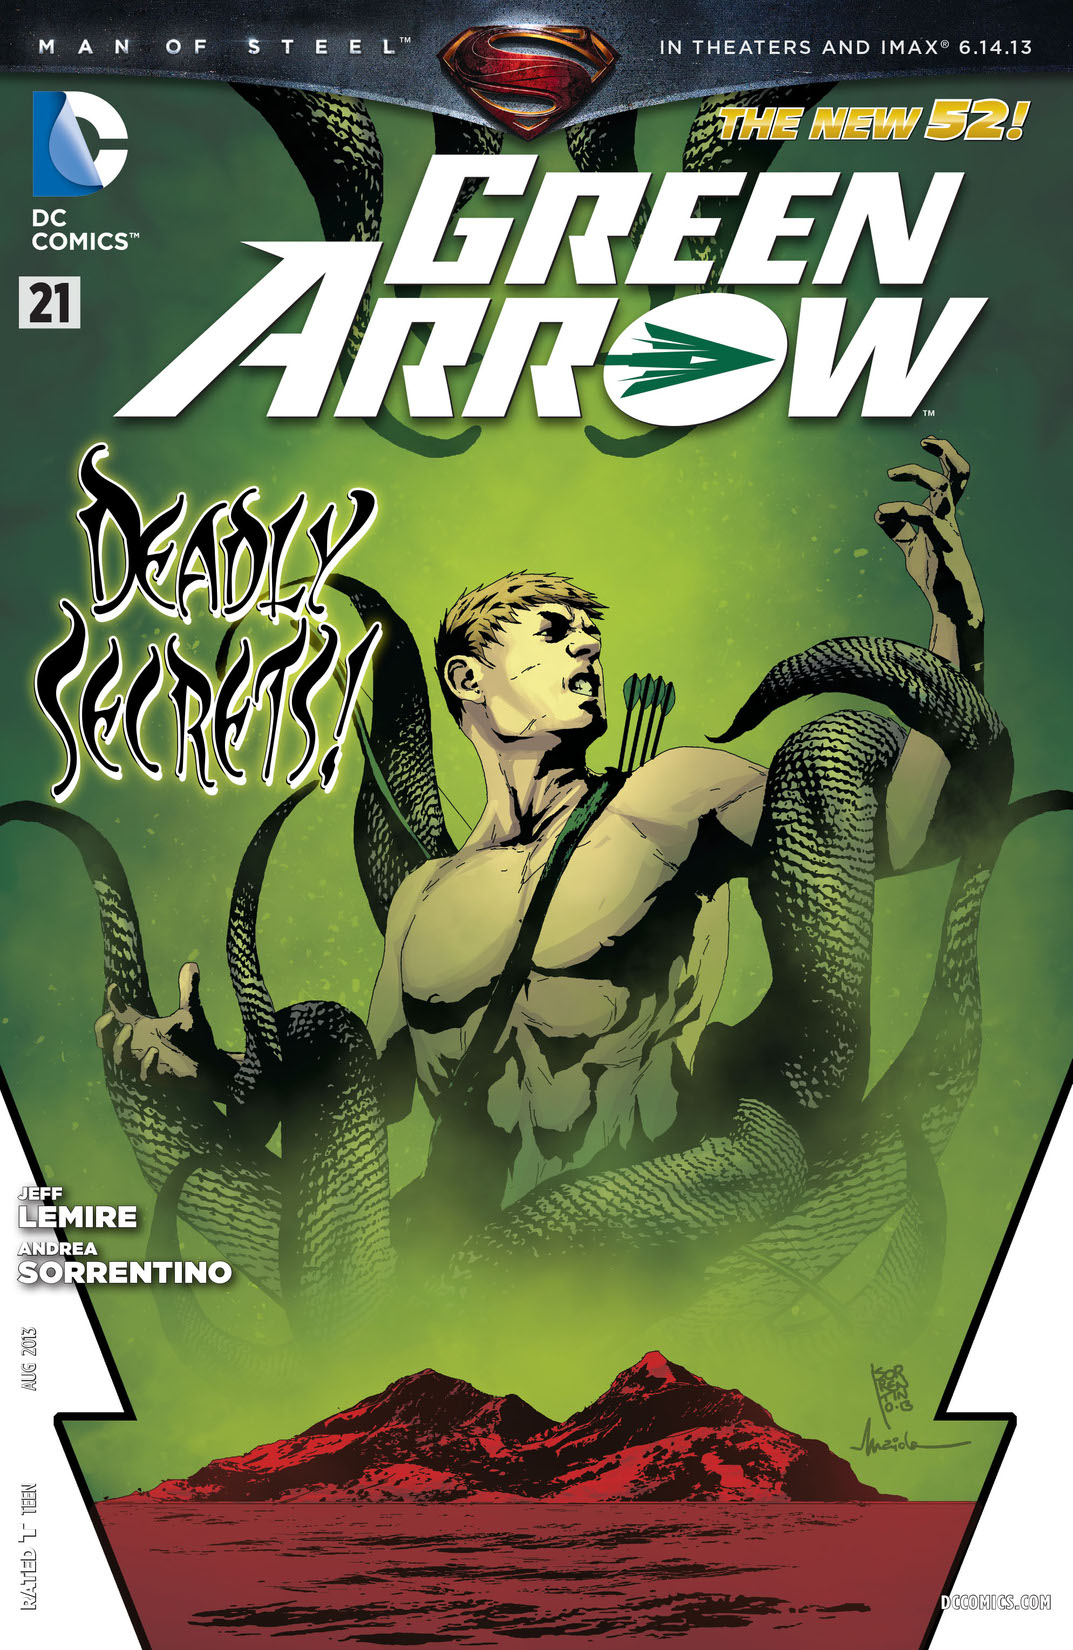 Green Arrow (2011-) #21 preview images